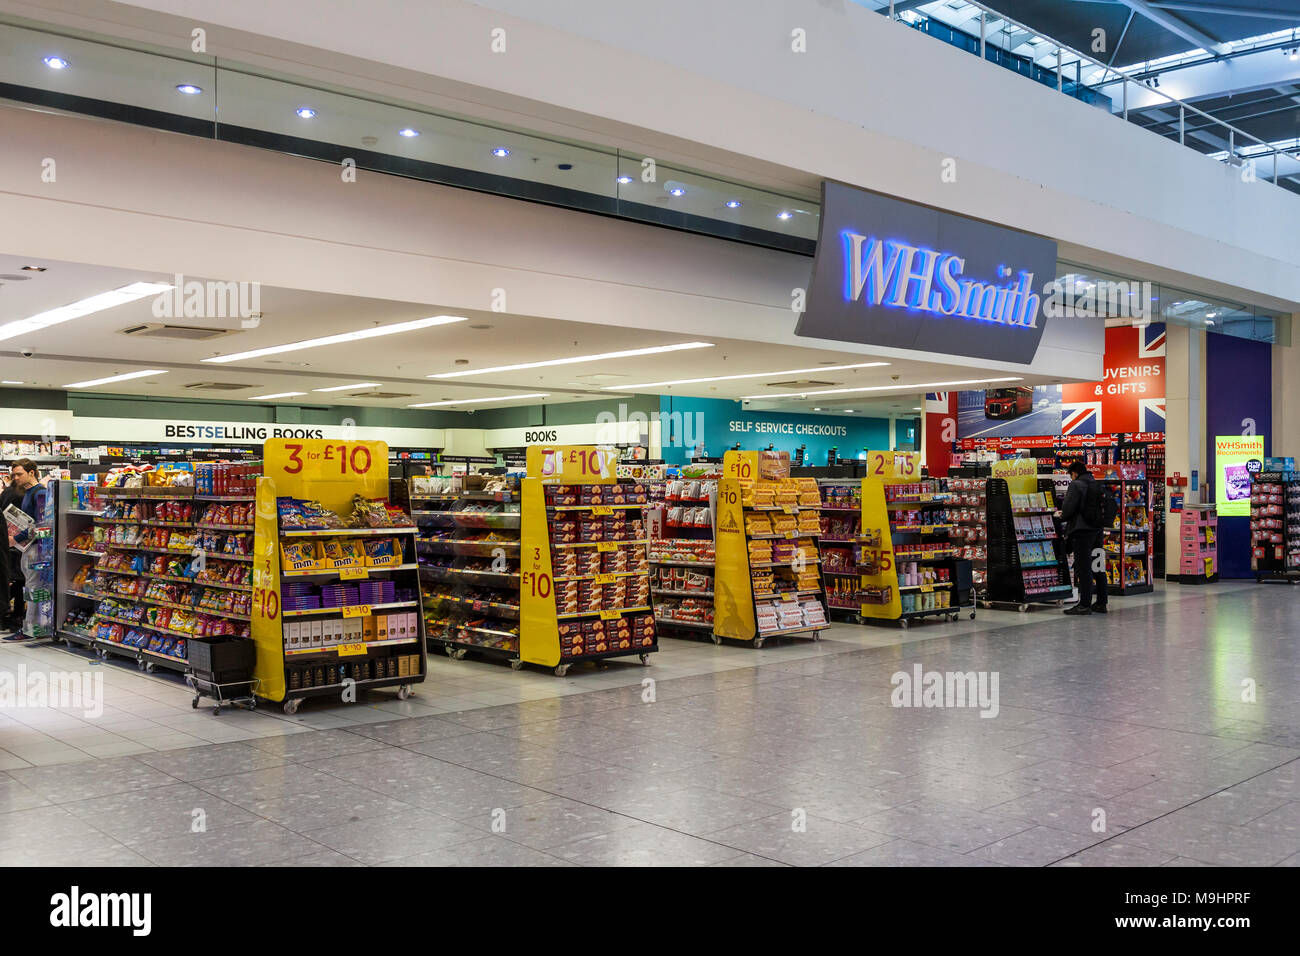 WHSmith retail outlet at Heathrow Airport Terminal 5 Departures lounge. Large entrance with displays of souvenirs and confectionery. Stock Photo